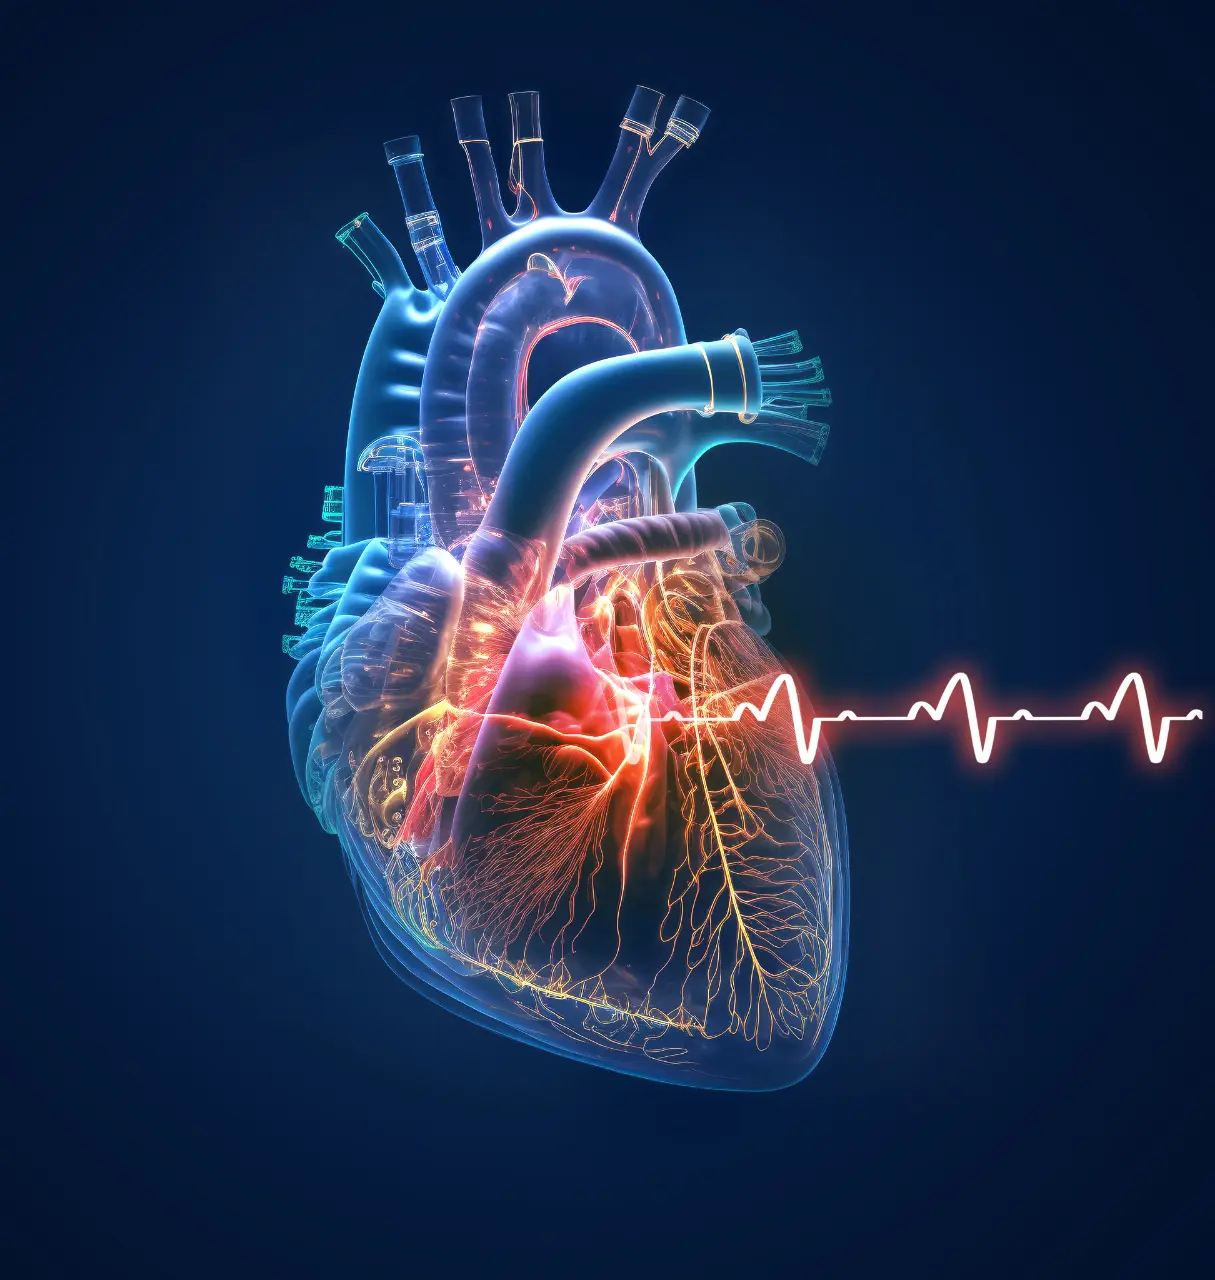 Illustration of a human heart with a glowing pulse line extendinng from its center.